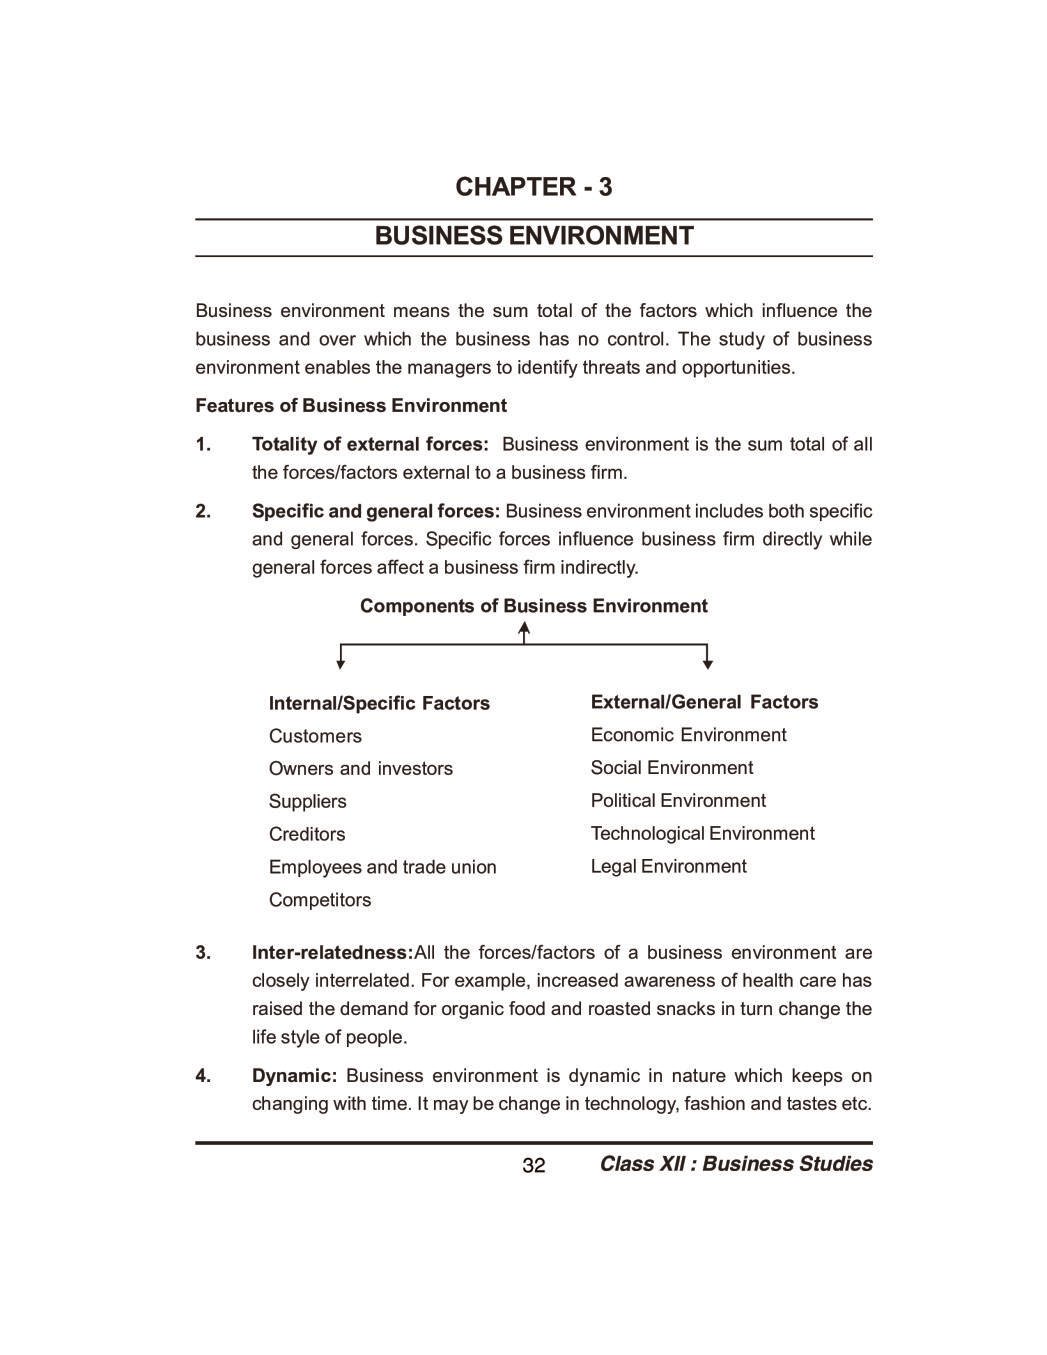 case study of business environment class 12 pdf